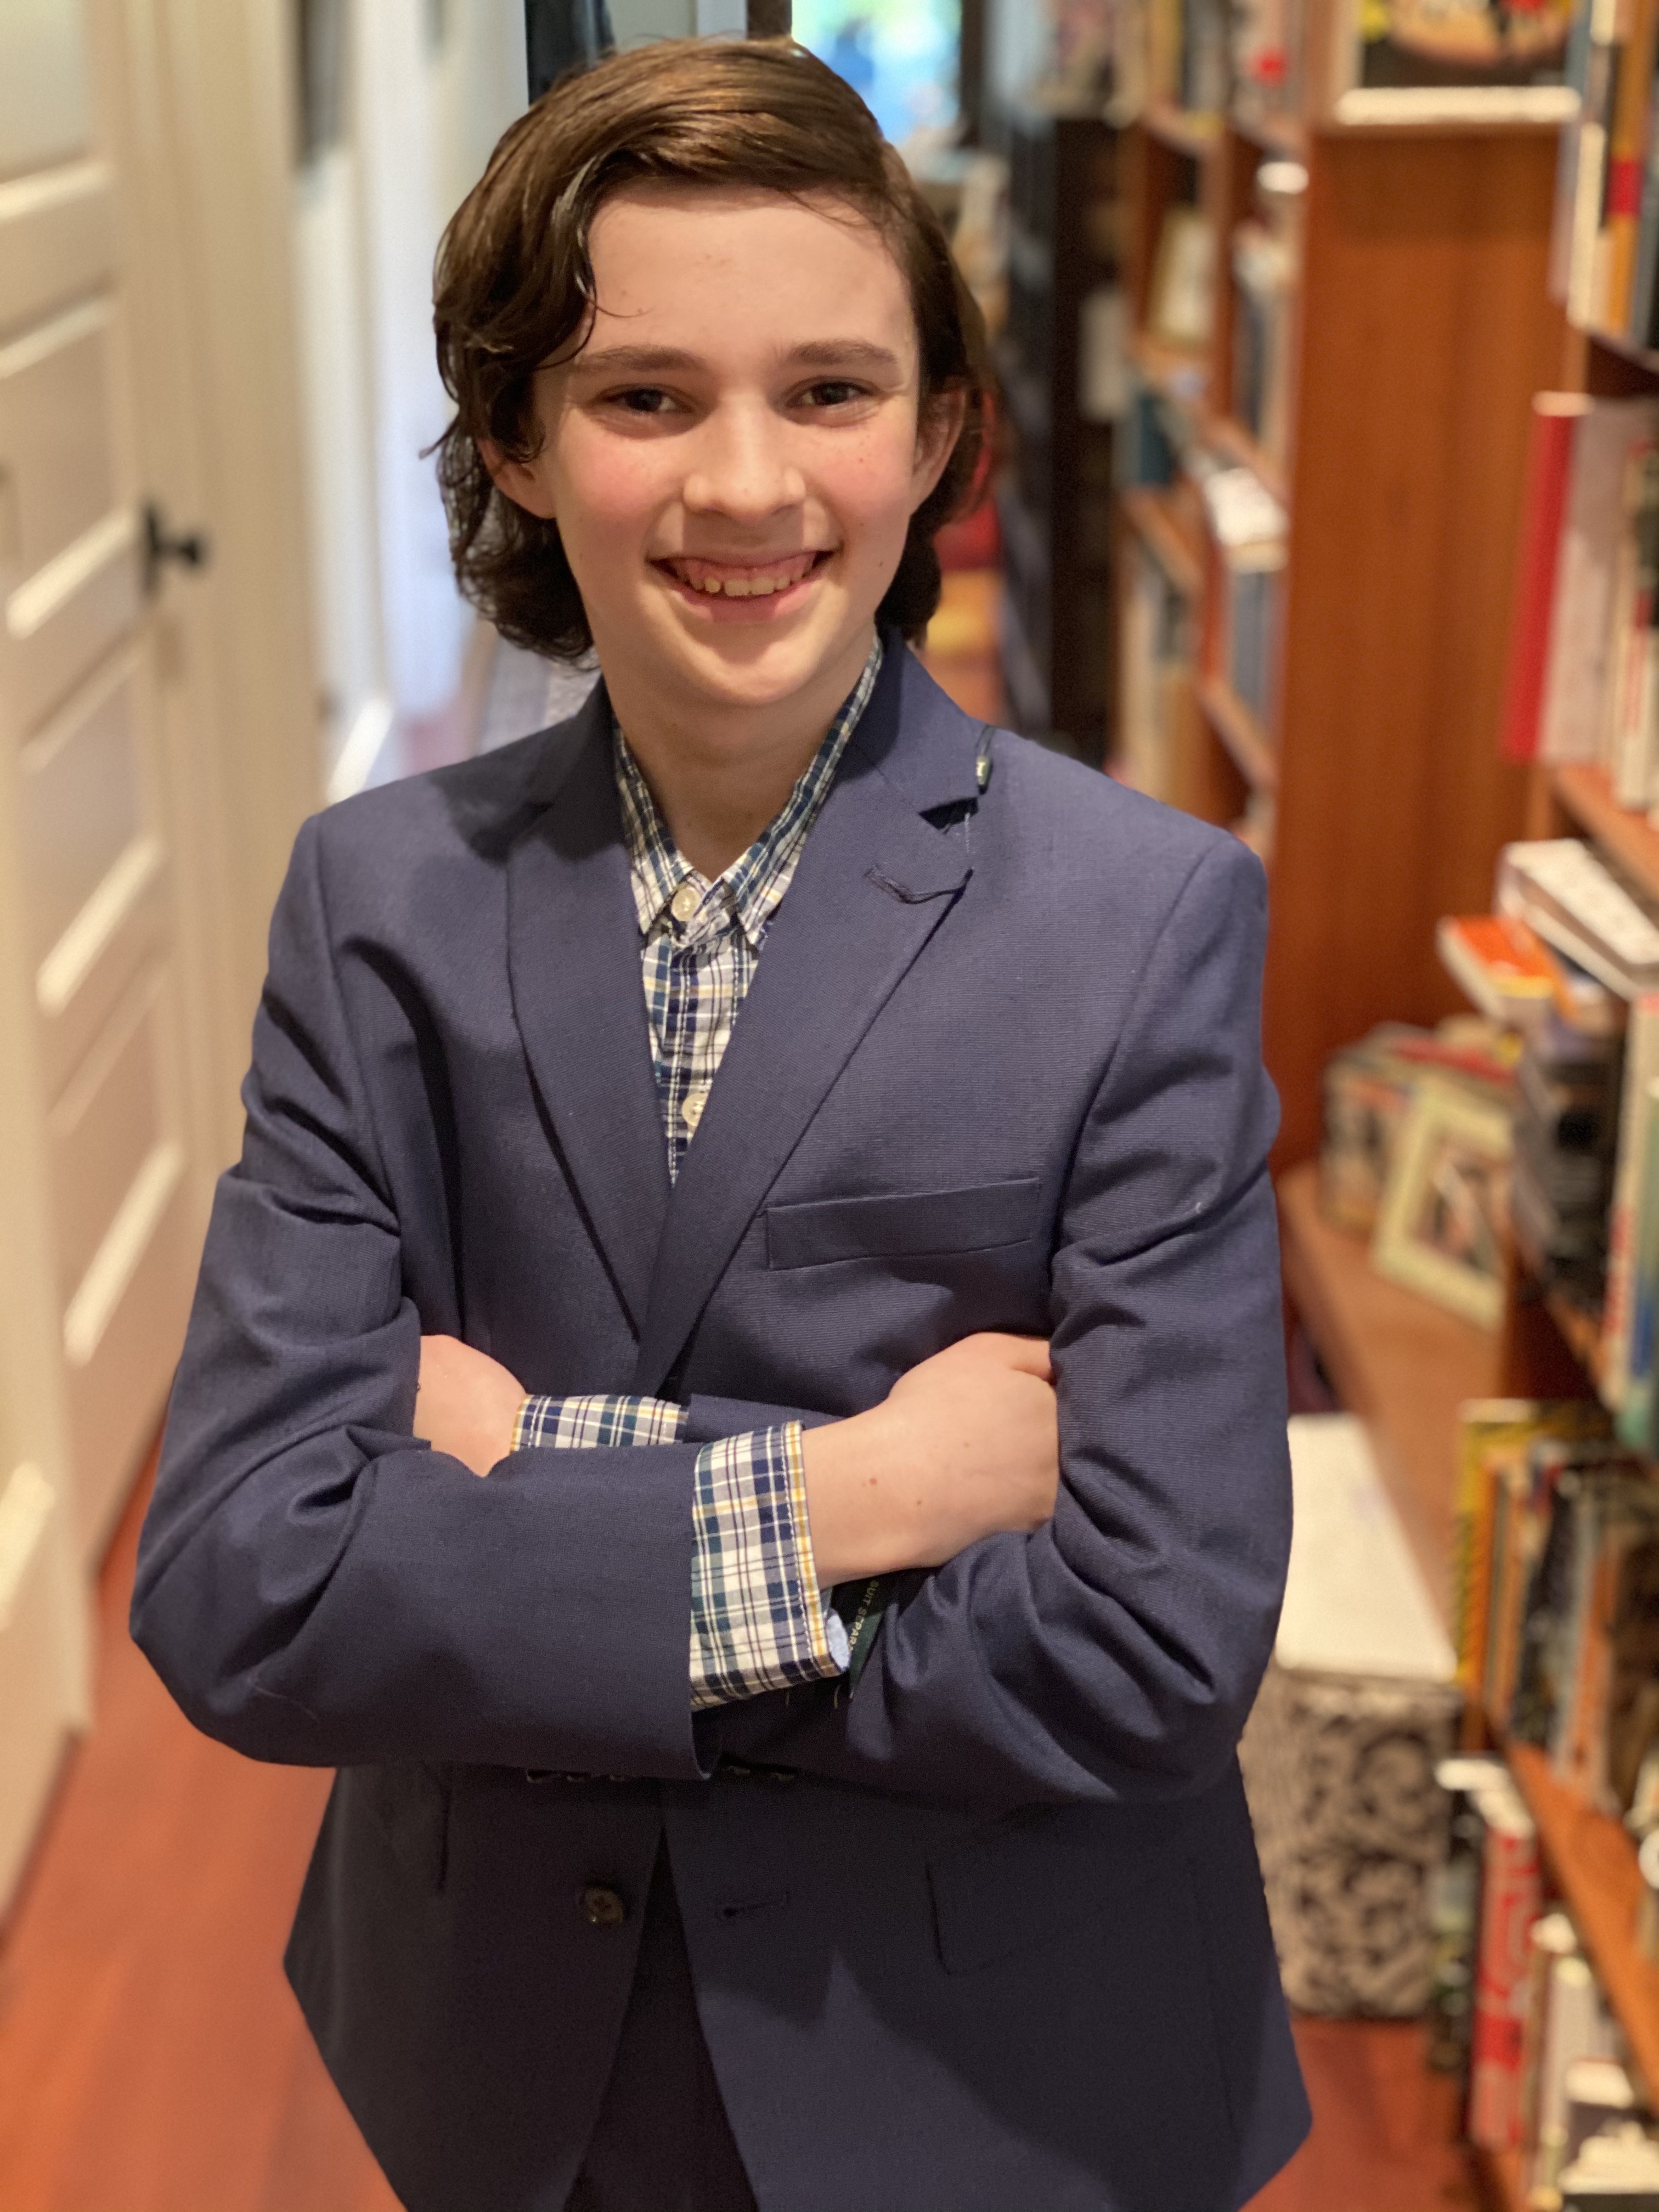 Noah found the perfect suit for his upcoming mitzvah!